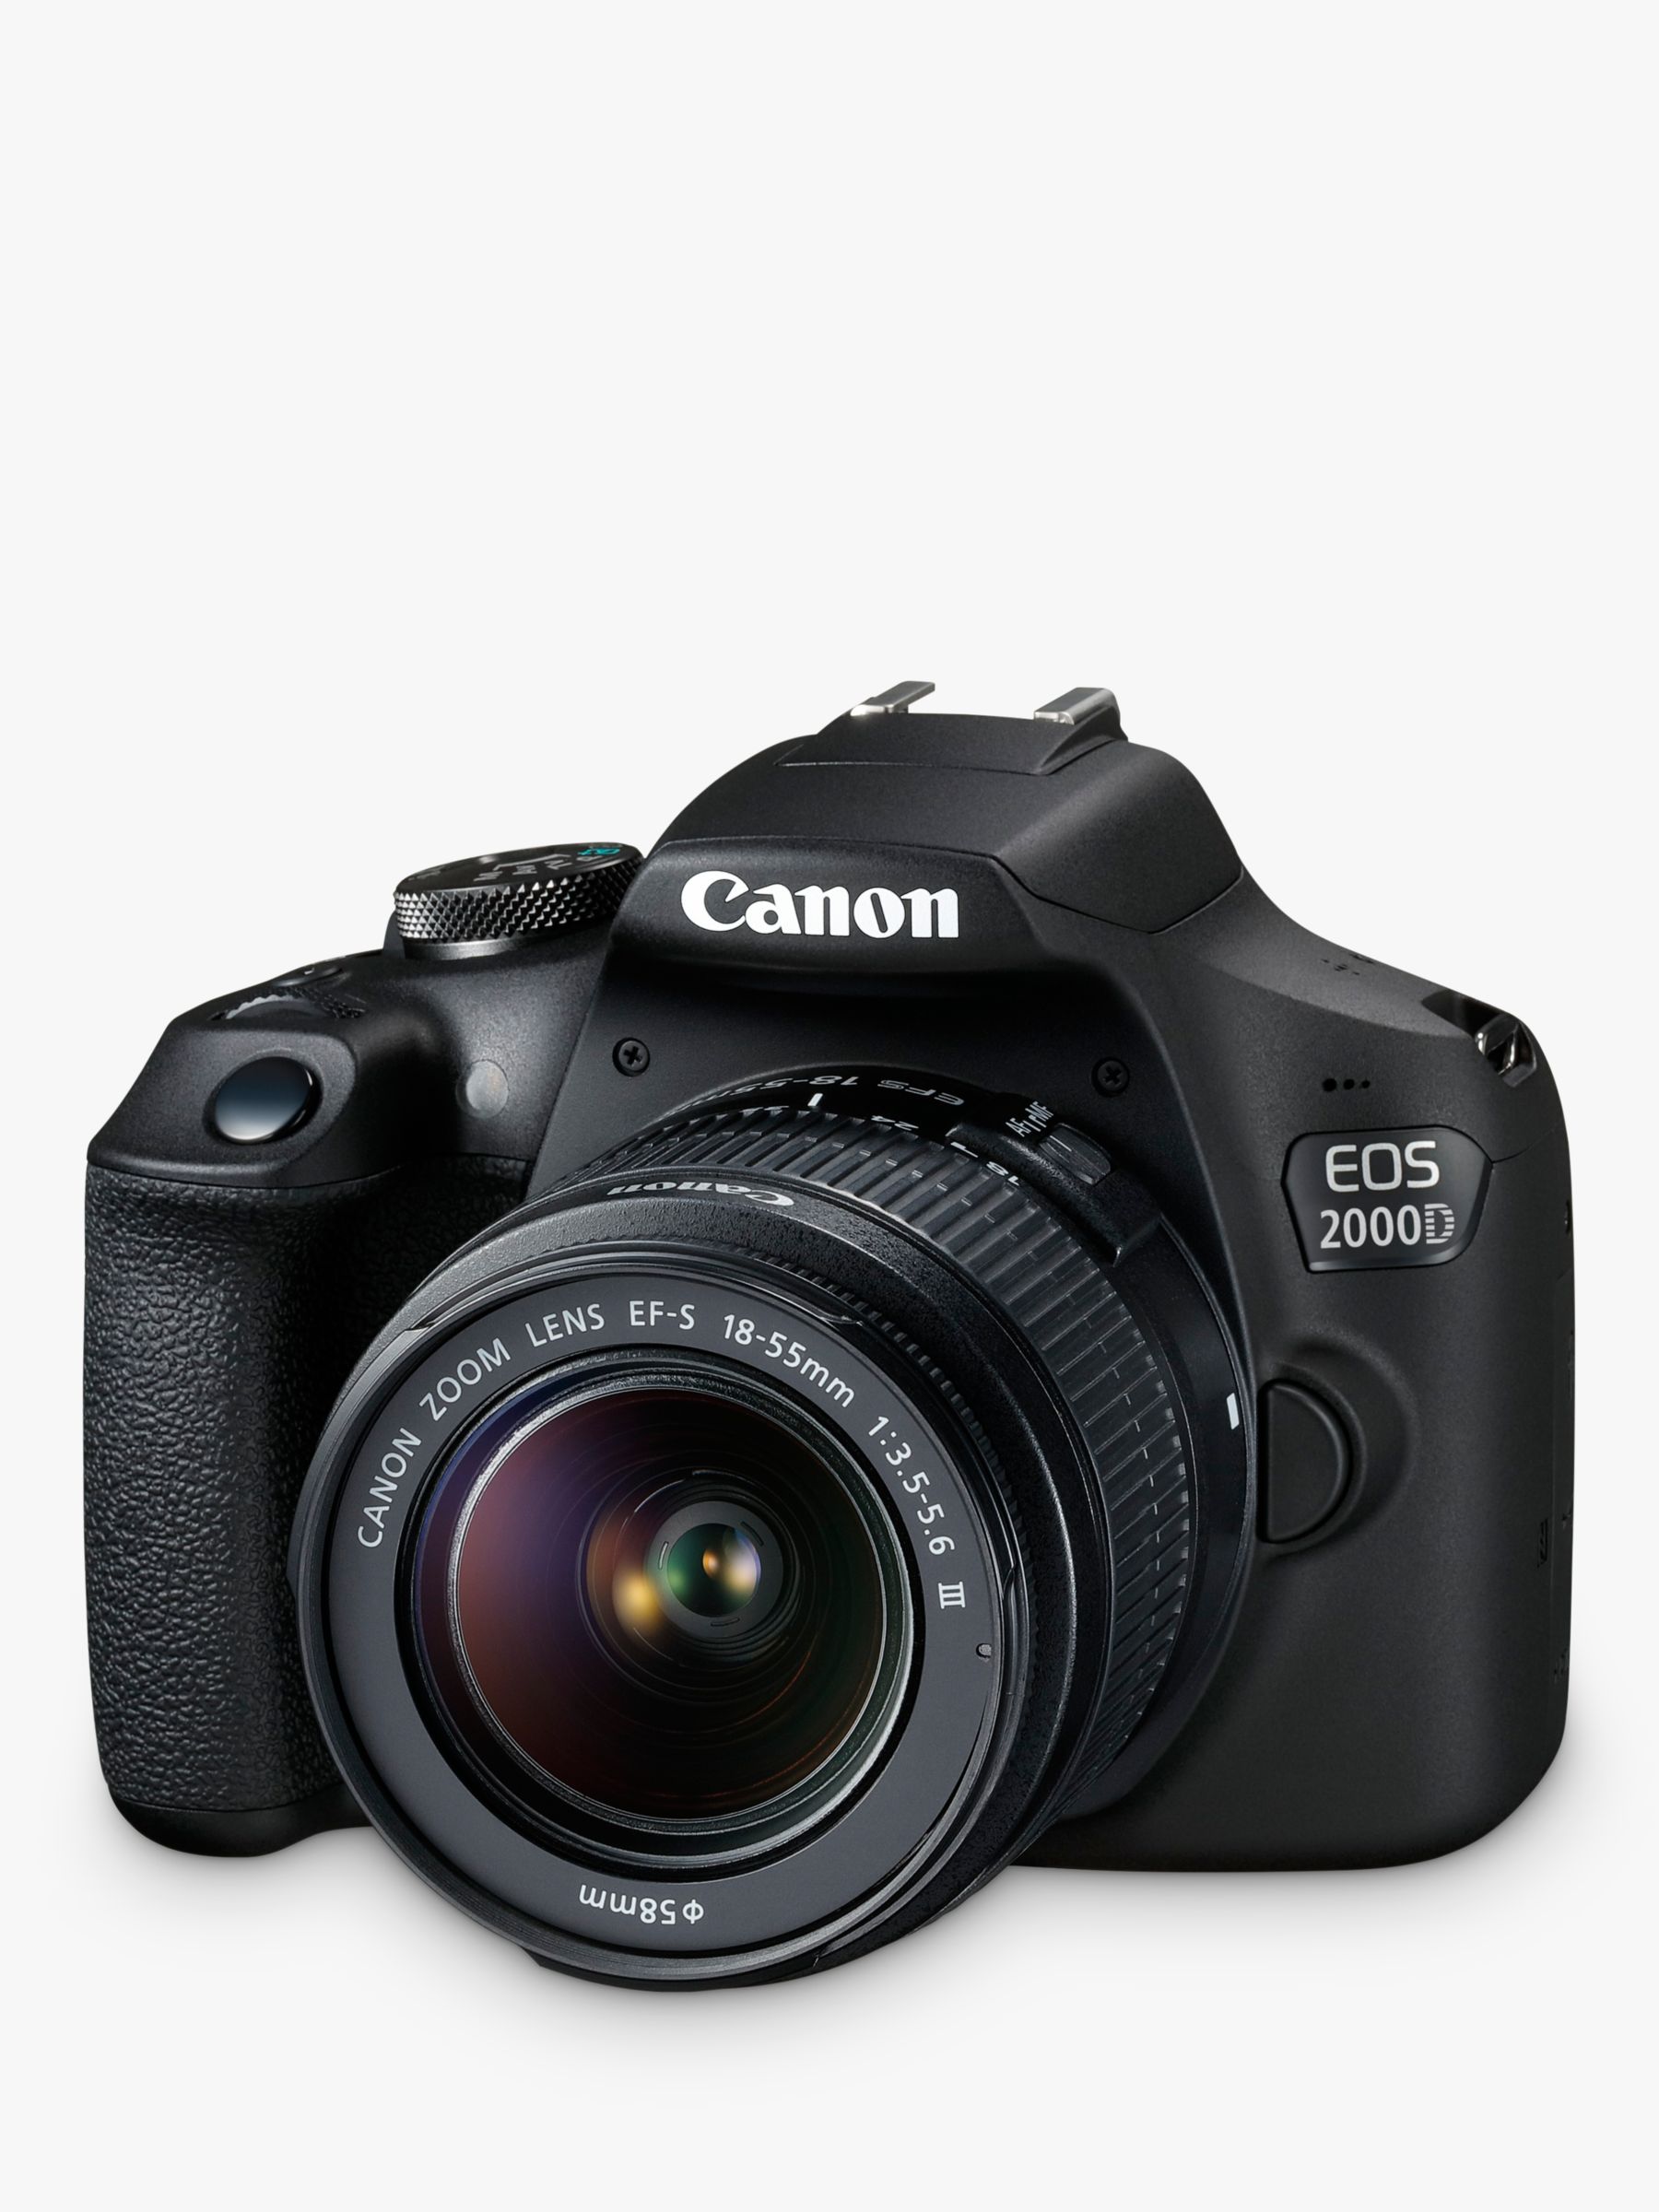 Canon EOS 2000D review: Is this the sub-£500 DSLR you're looking for?